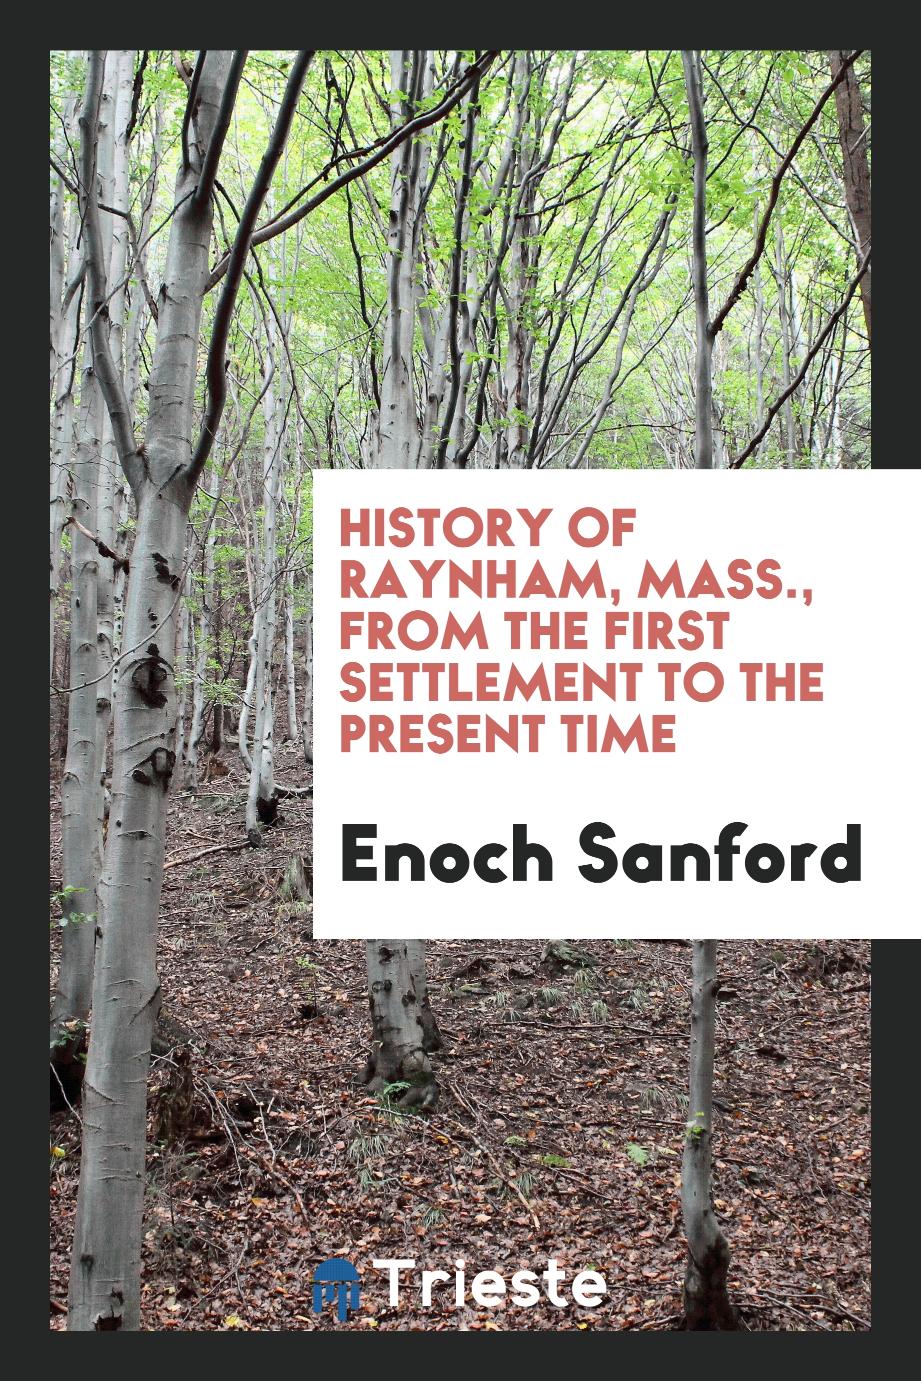 Enoch Sanford - History of Raynham, Mass., From the First Settlement to the Present Time